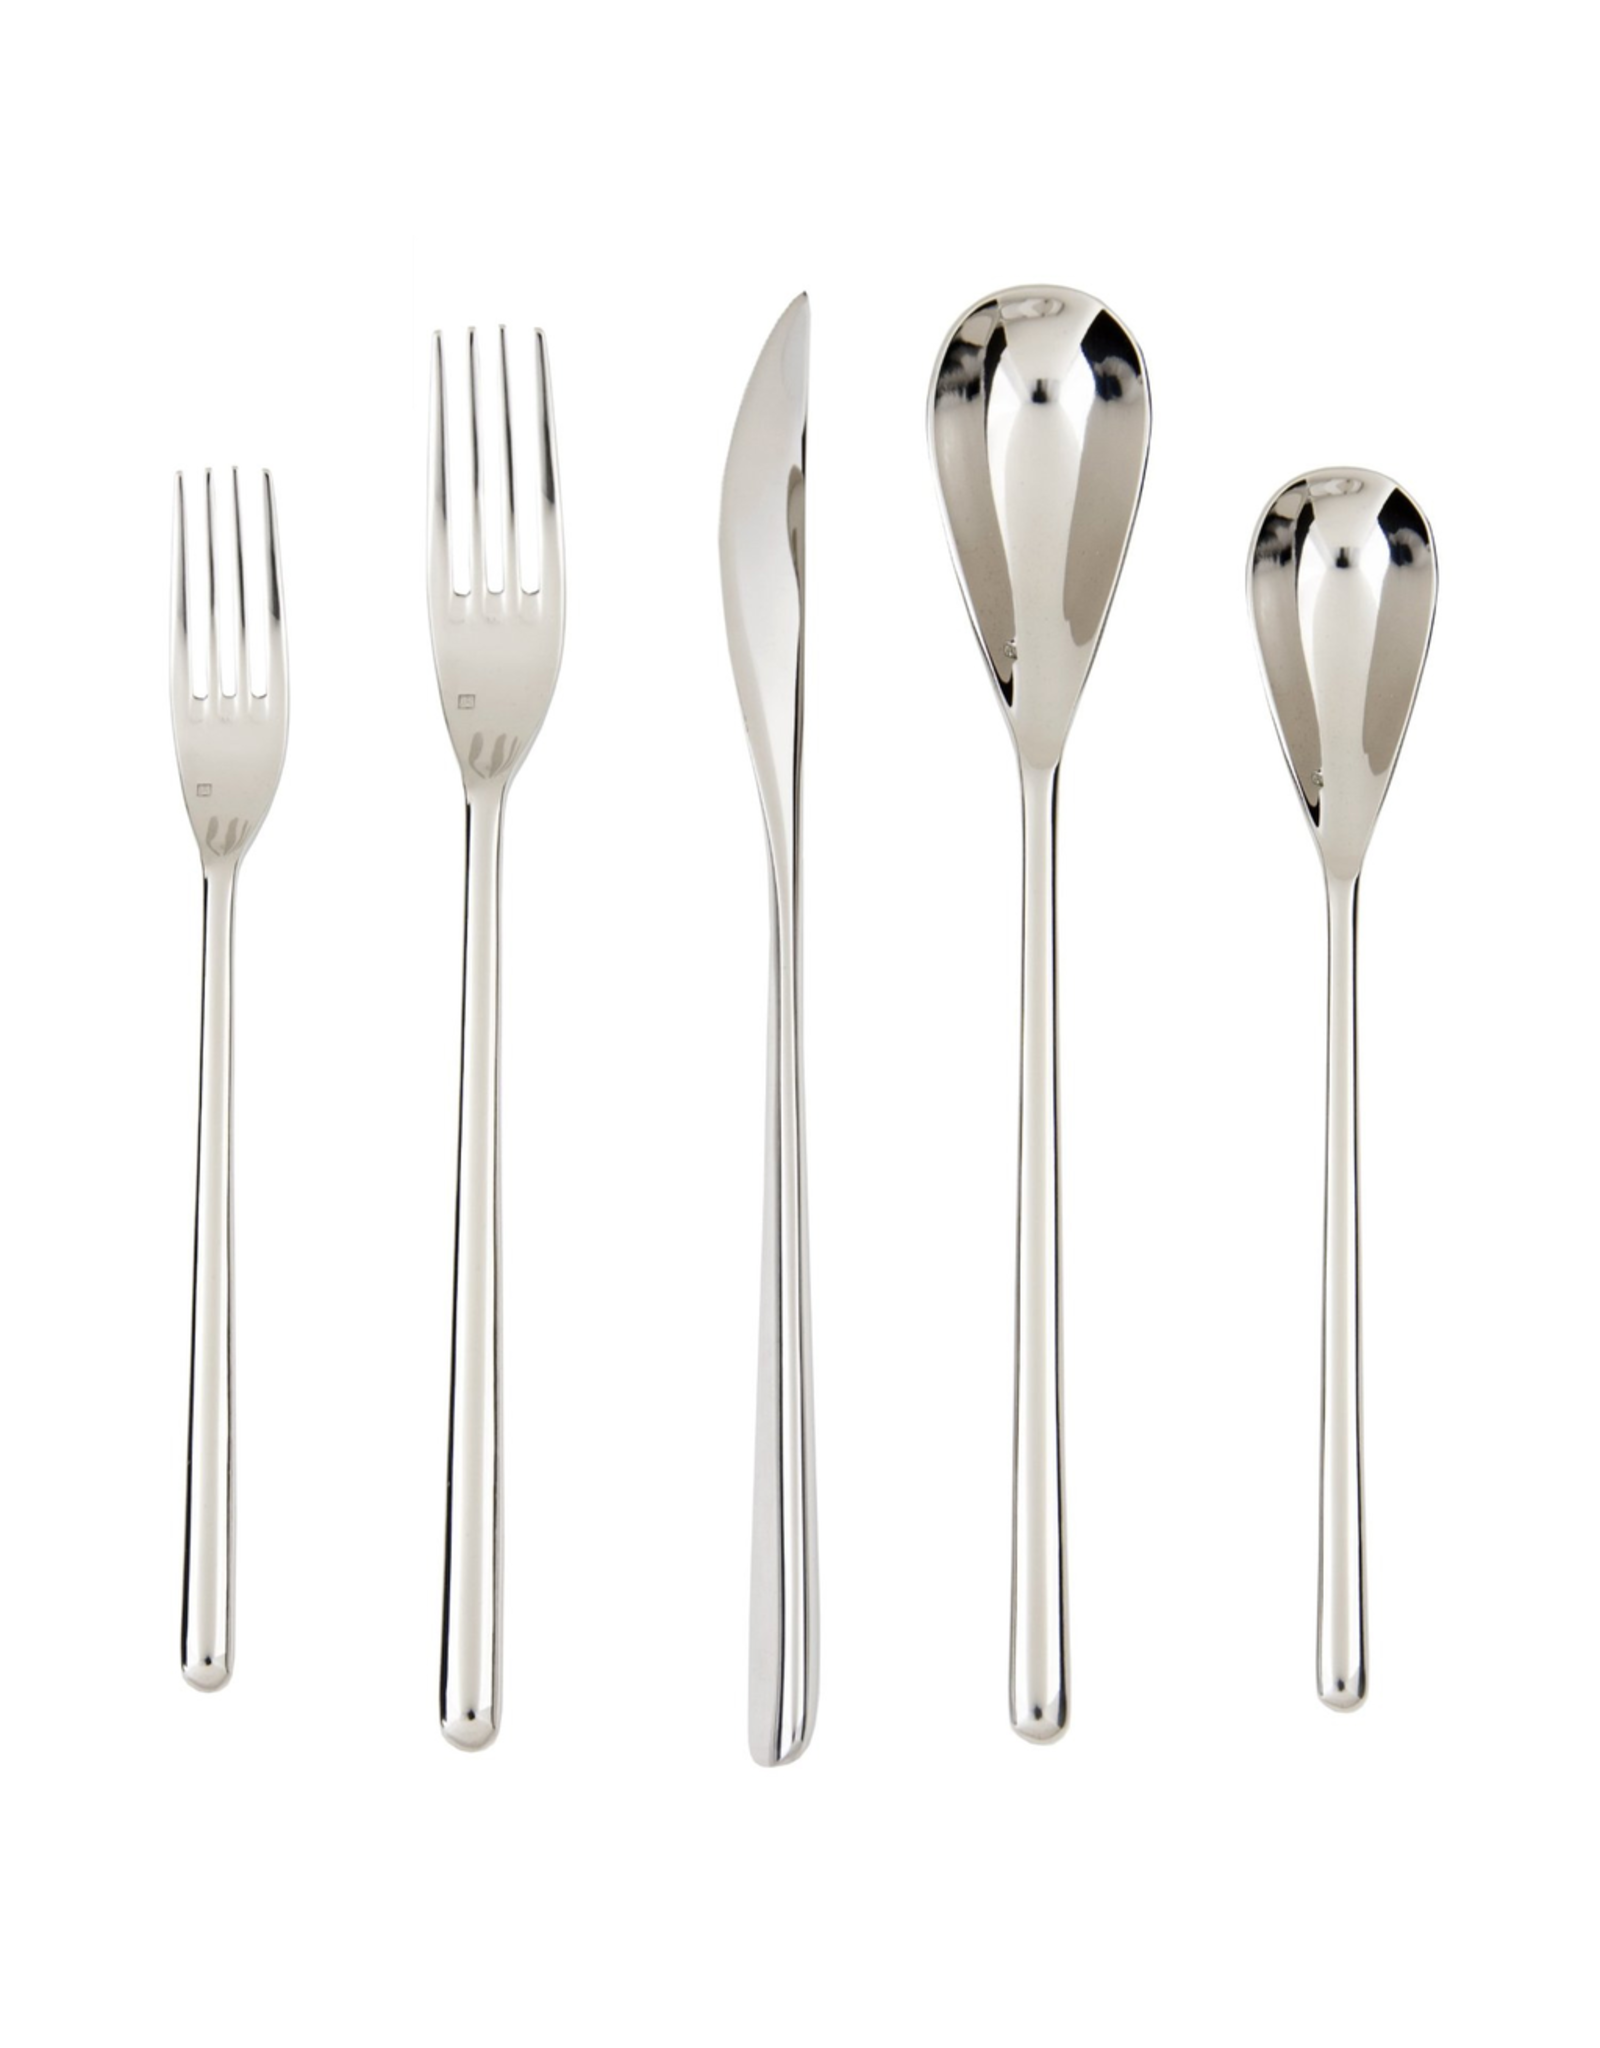 Fortessa Dragonfly Stainless Steel Flatware Set 5-Piece Setting